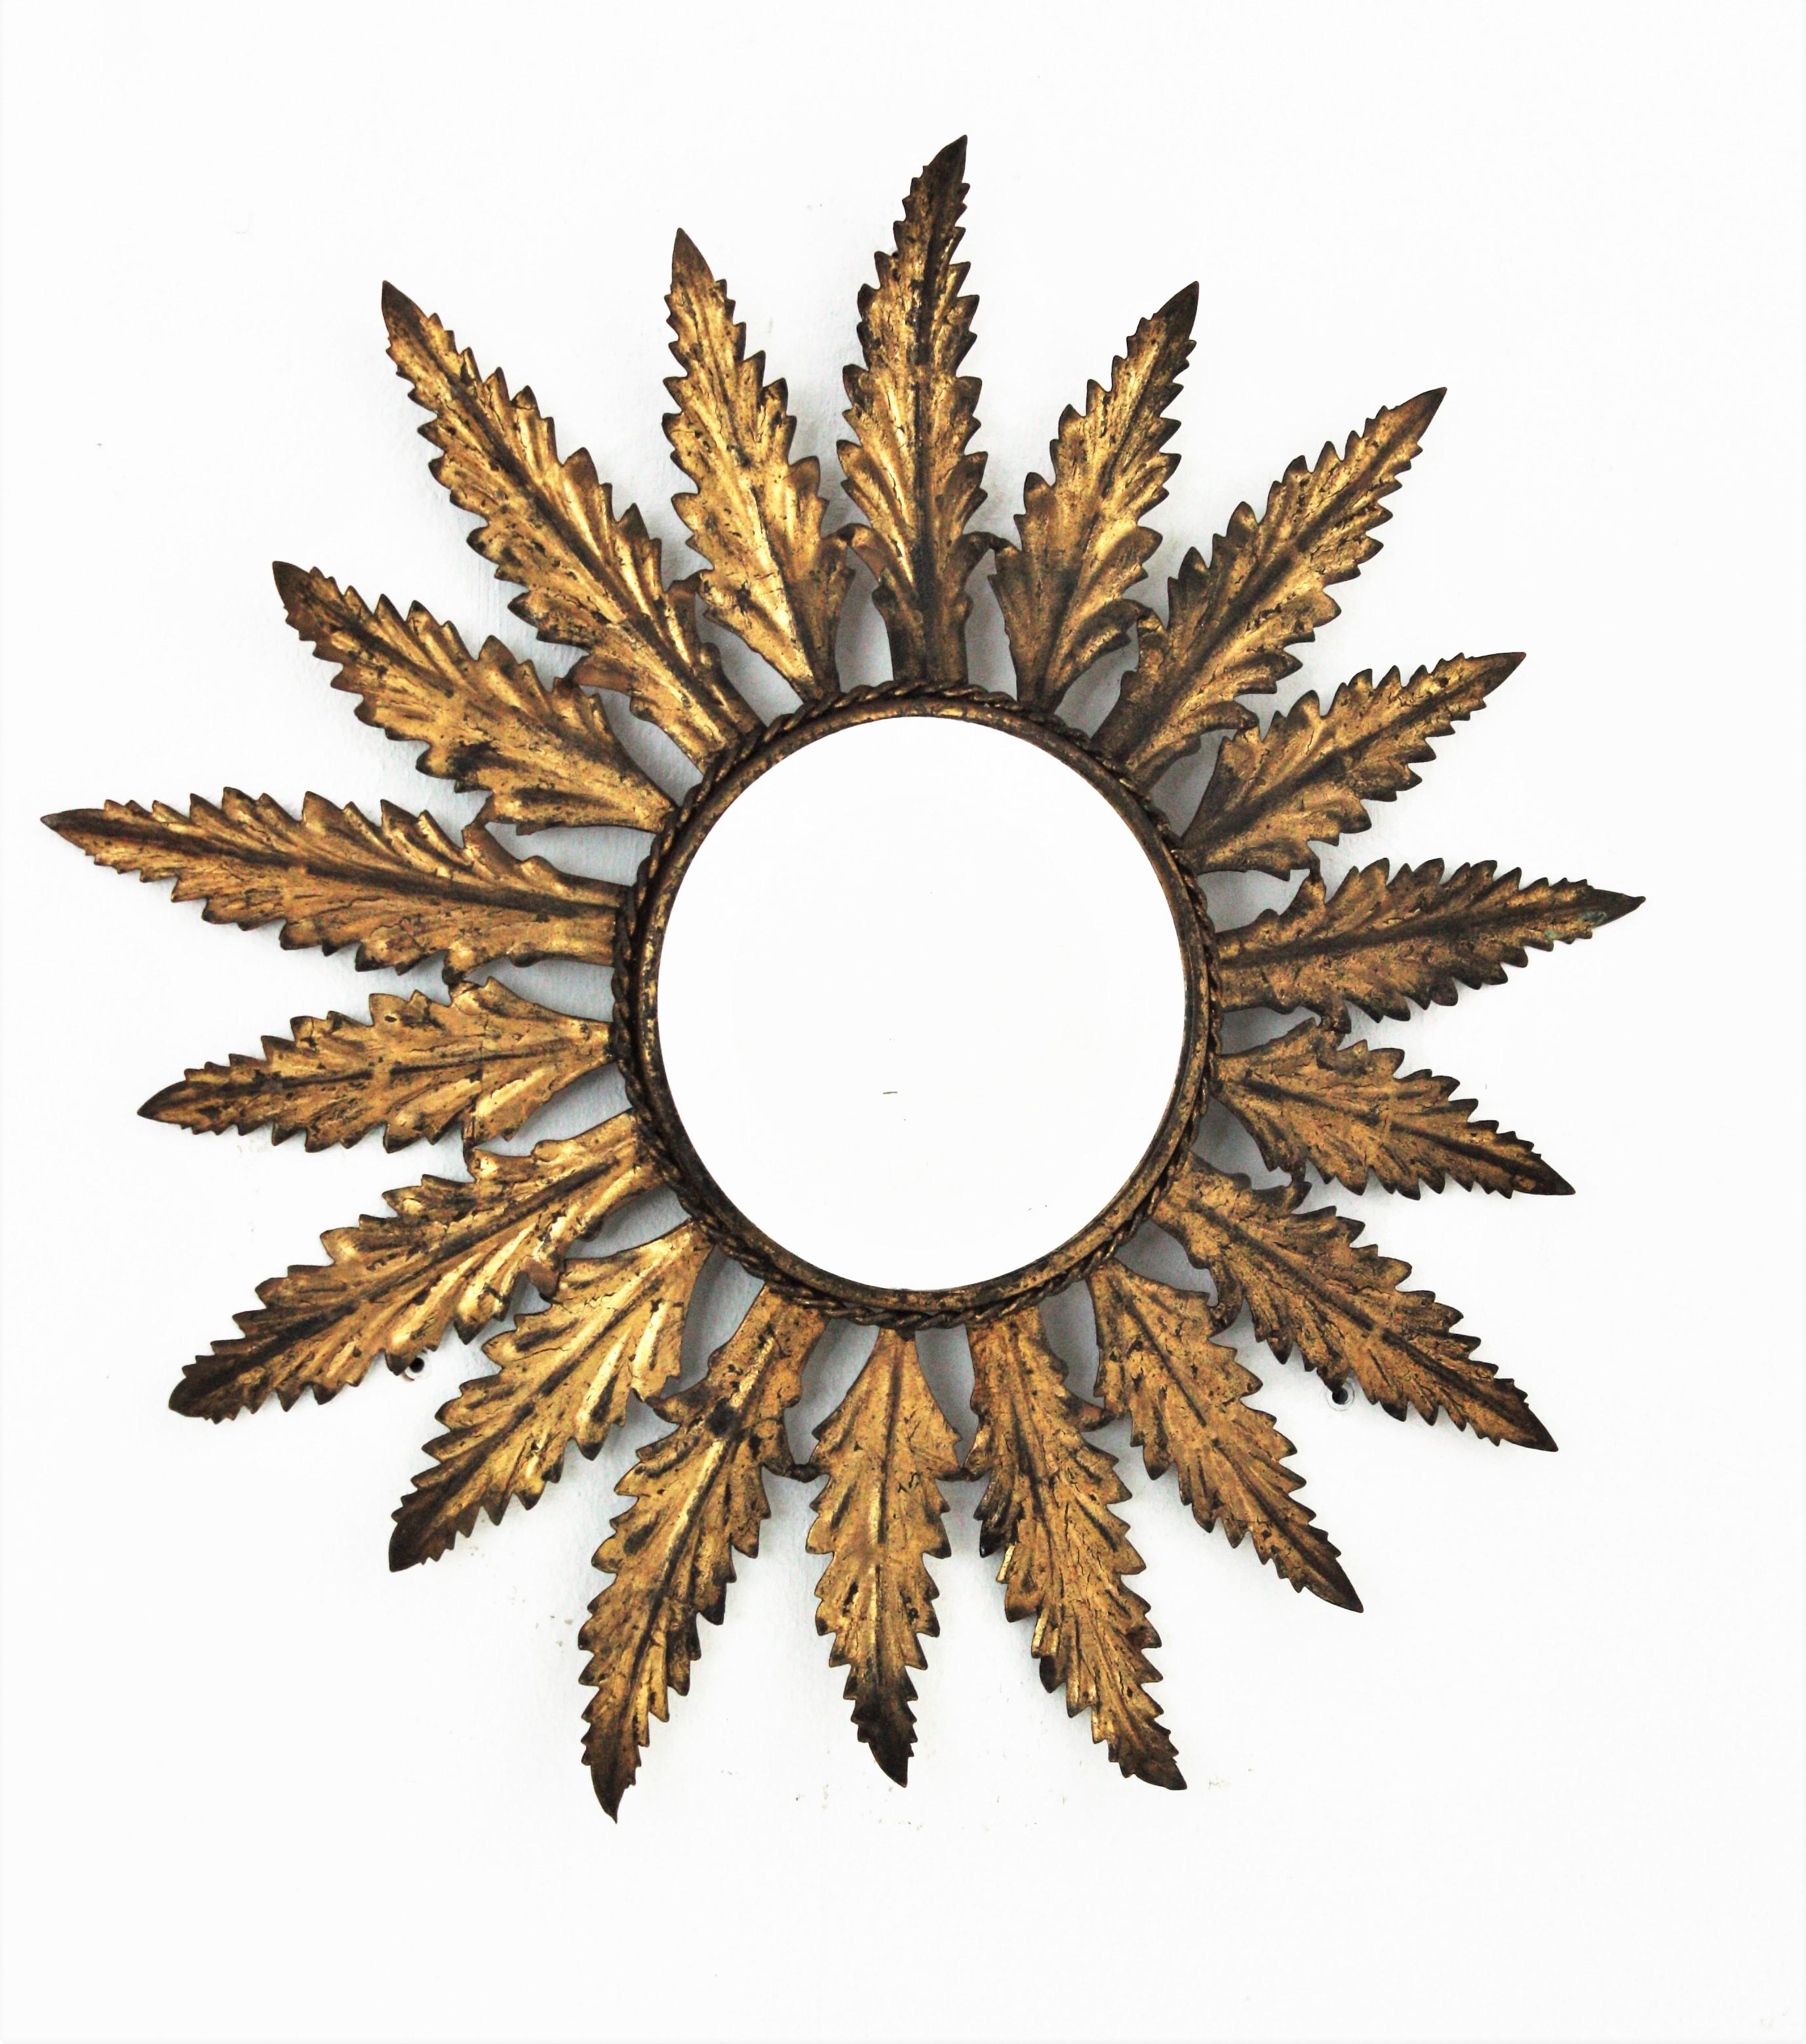 A beautiful handcrafted gilt iron sunburst mirror with alternating leaf motif and gold leaf finish. Spain, 1950s.
It has a nice leafed / foliate design and a terrific original gold leaf gilding aged patina.
Interestind placed alone or as a part of